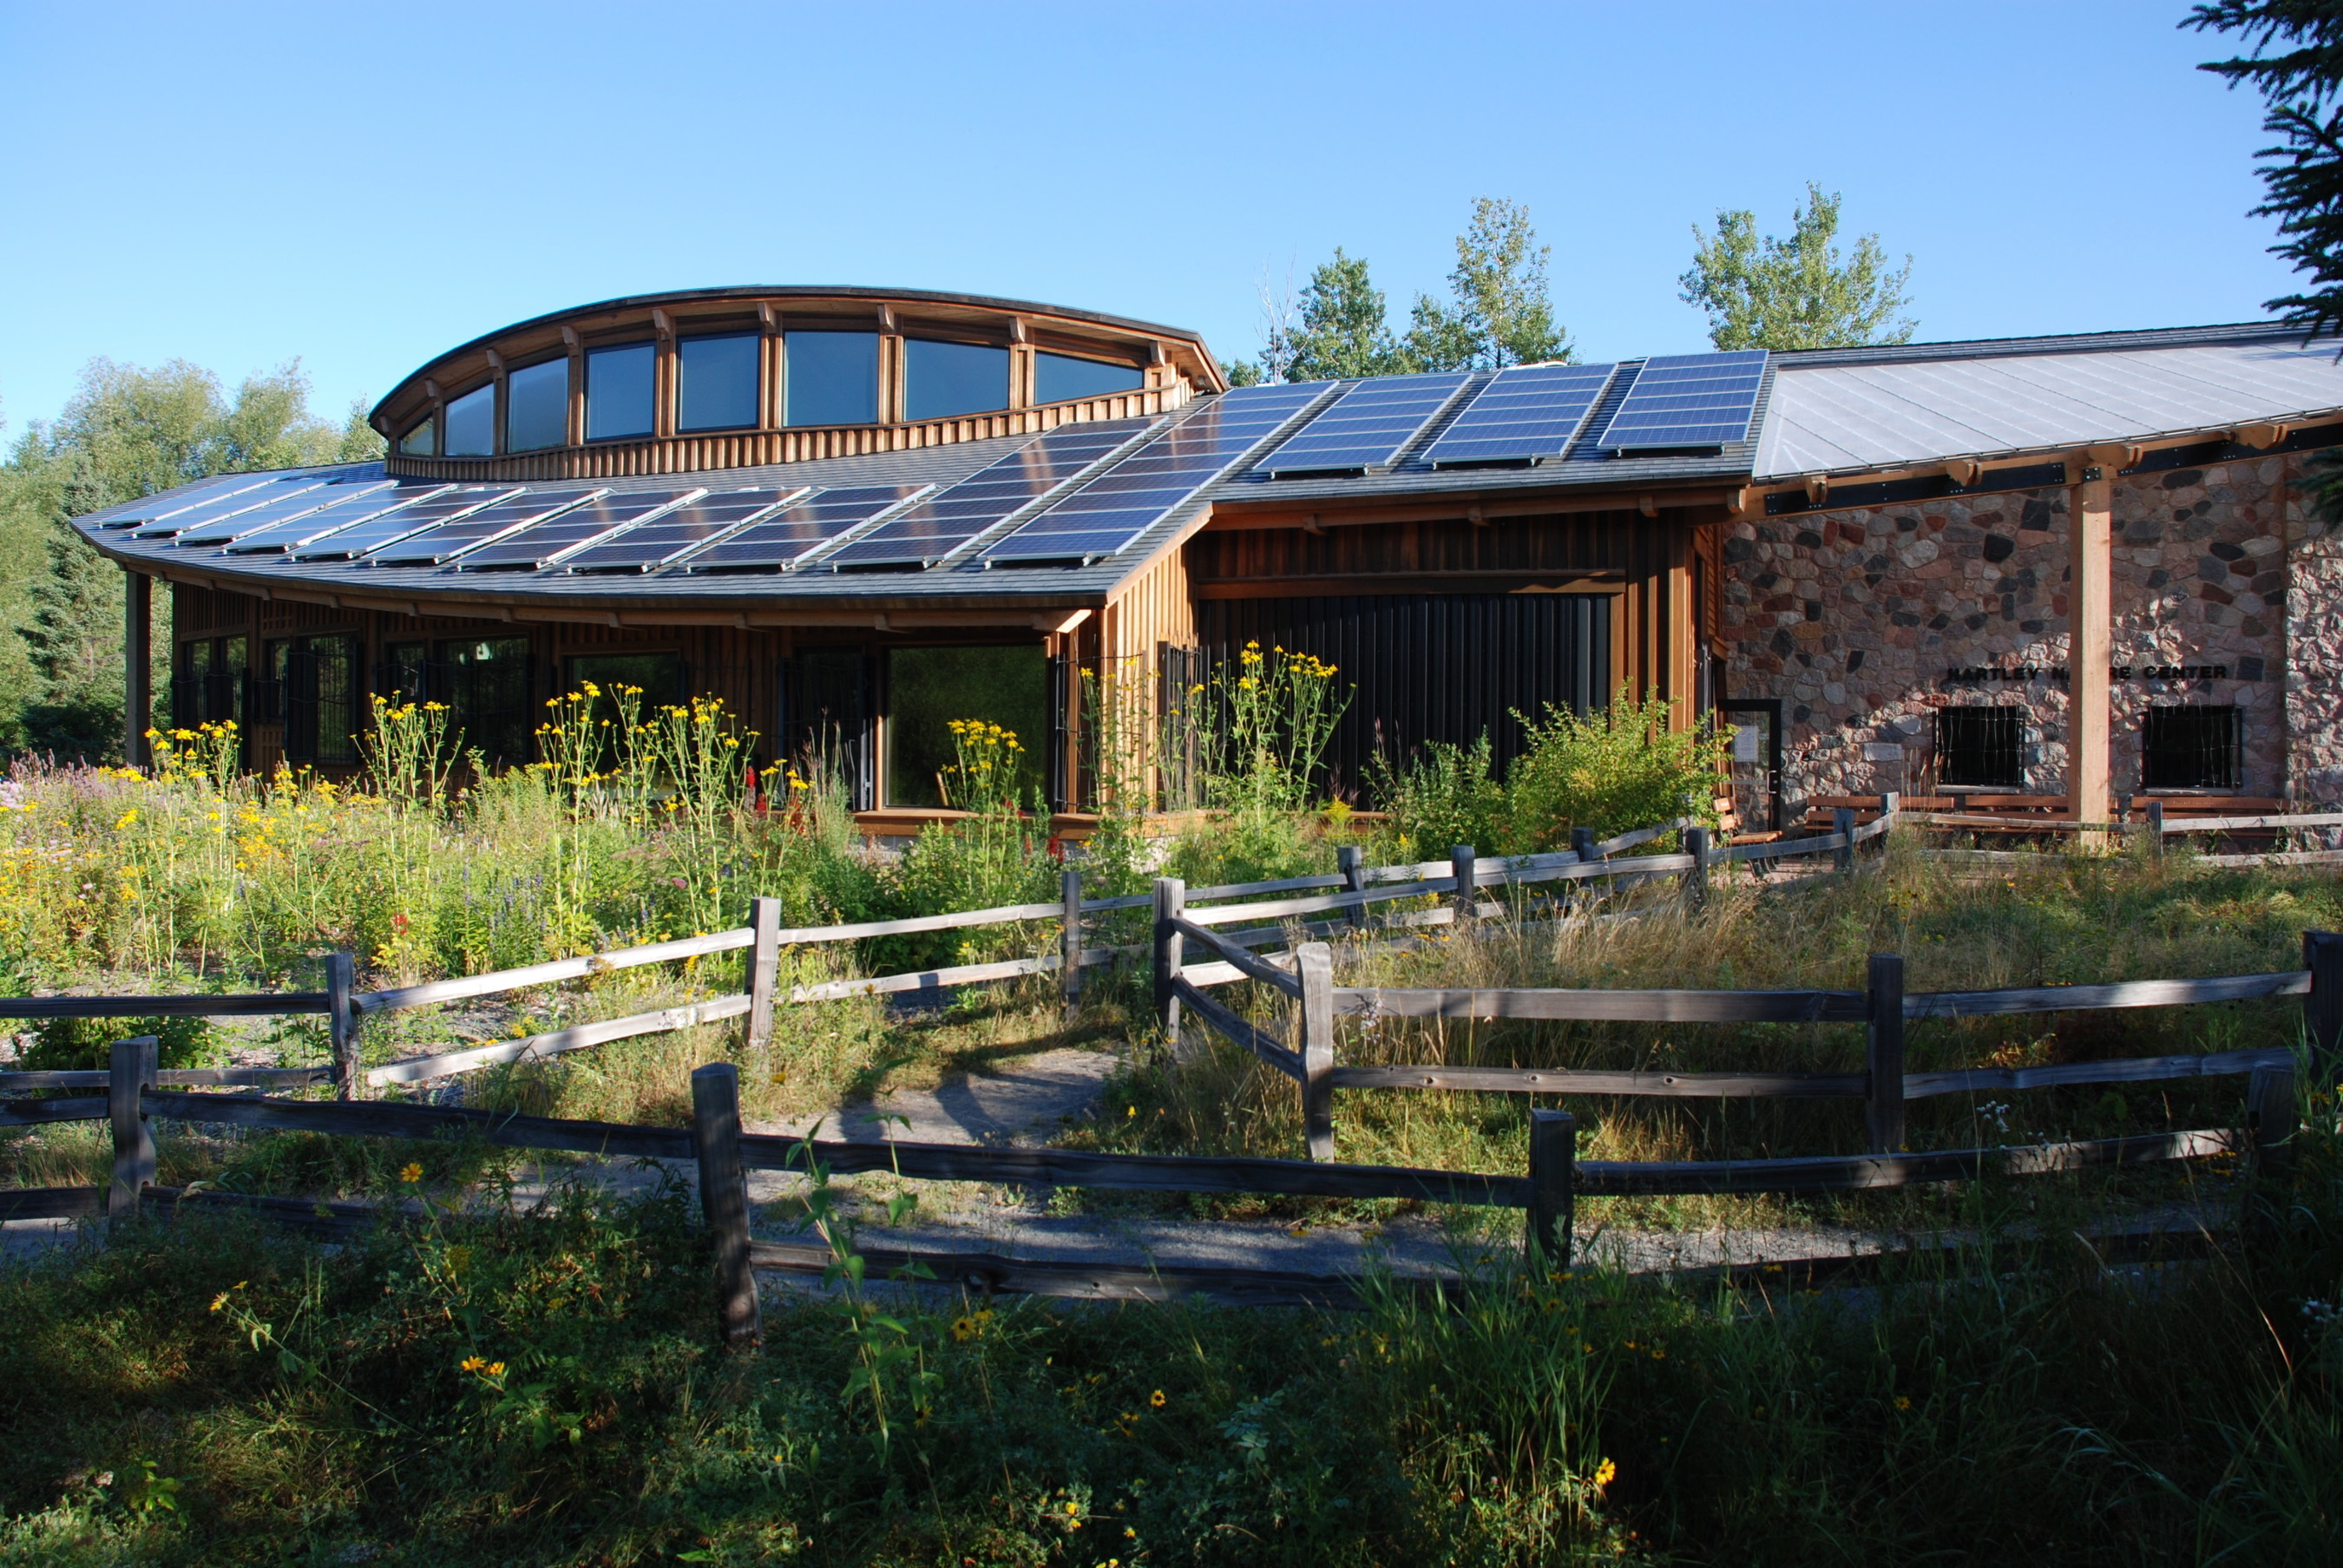 Duluth-based Hartley Nature Center installs Sunverge energy storage system to provide community phone charging station during grid outages.